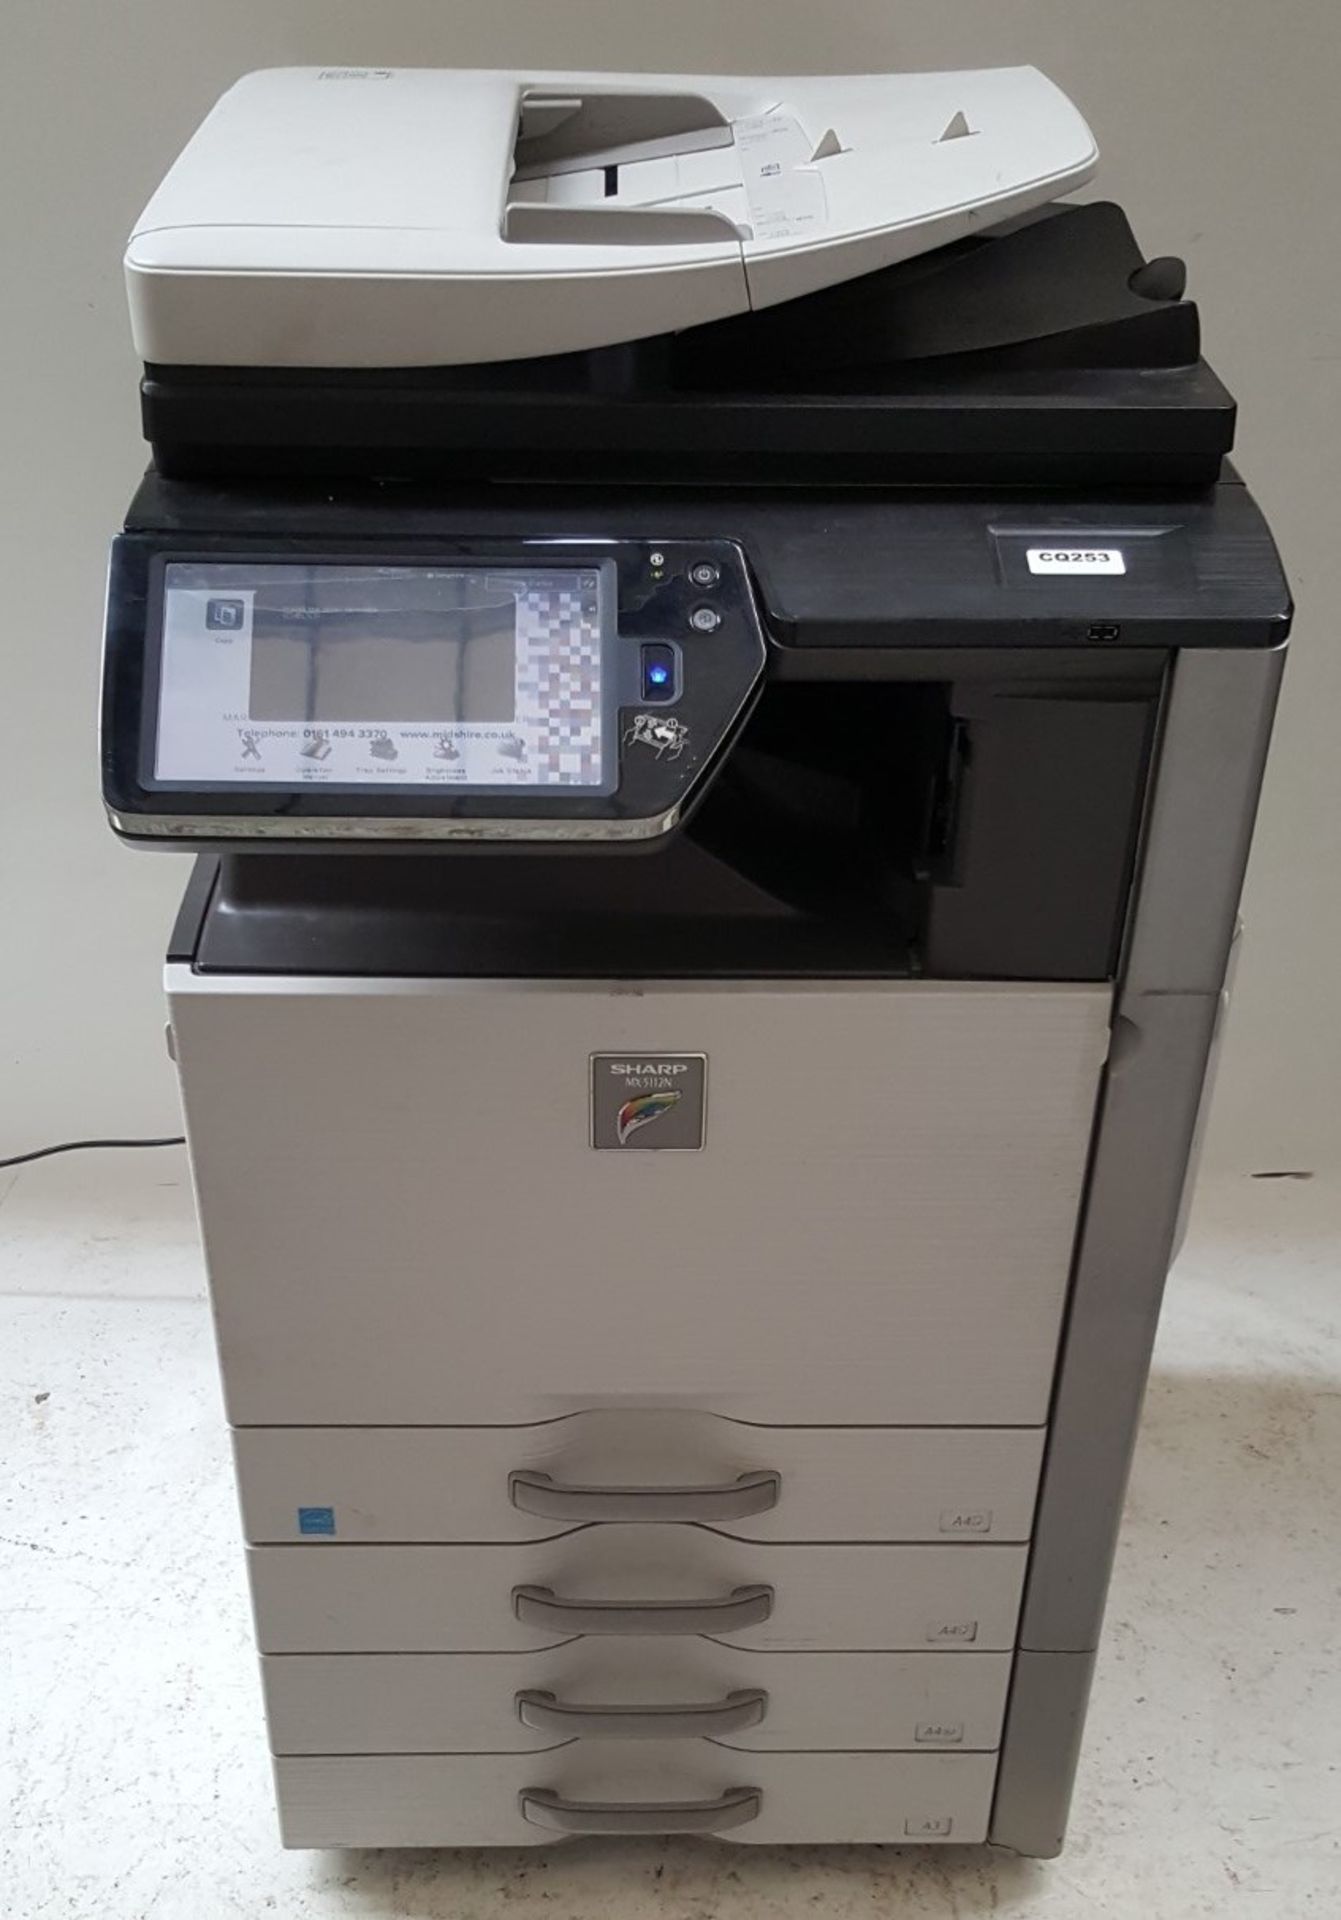 1 x Sharp MX-5112N Digital Copier Office Printer - Tested and Working - Ref CQ253 - CL422 -